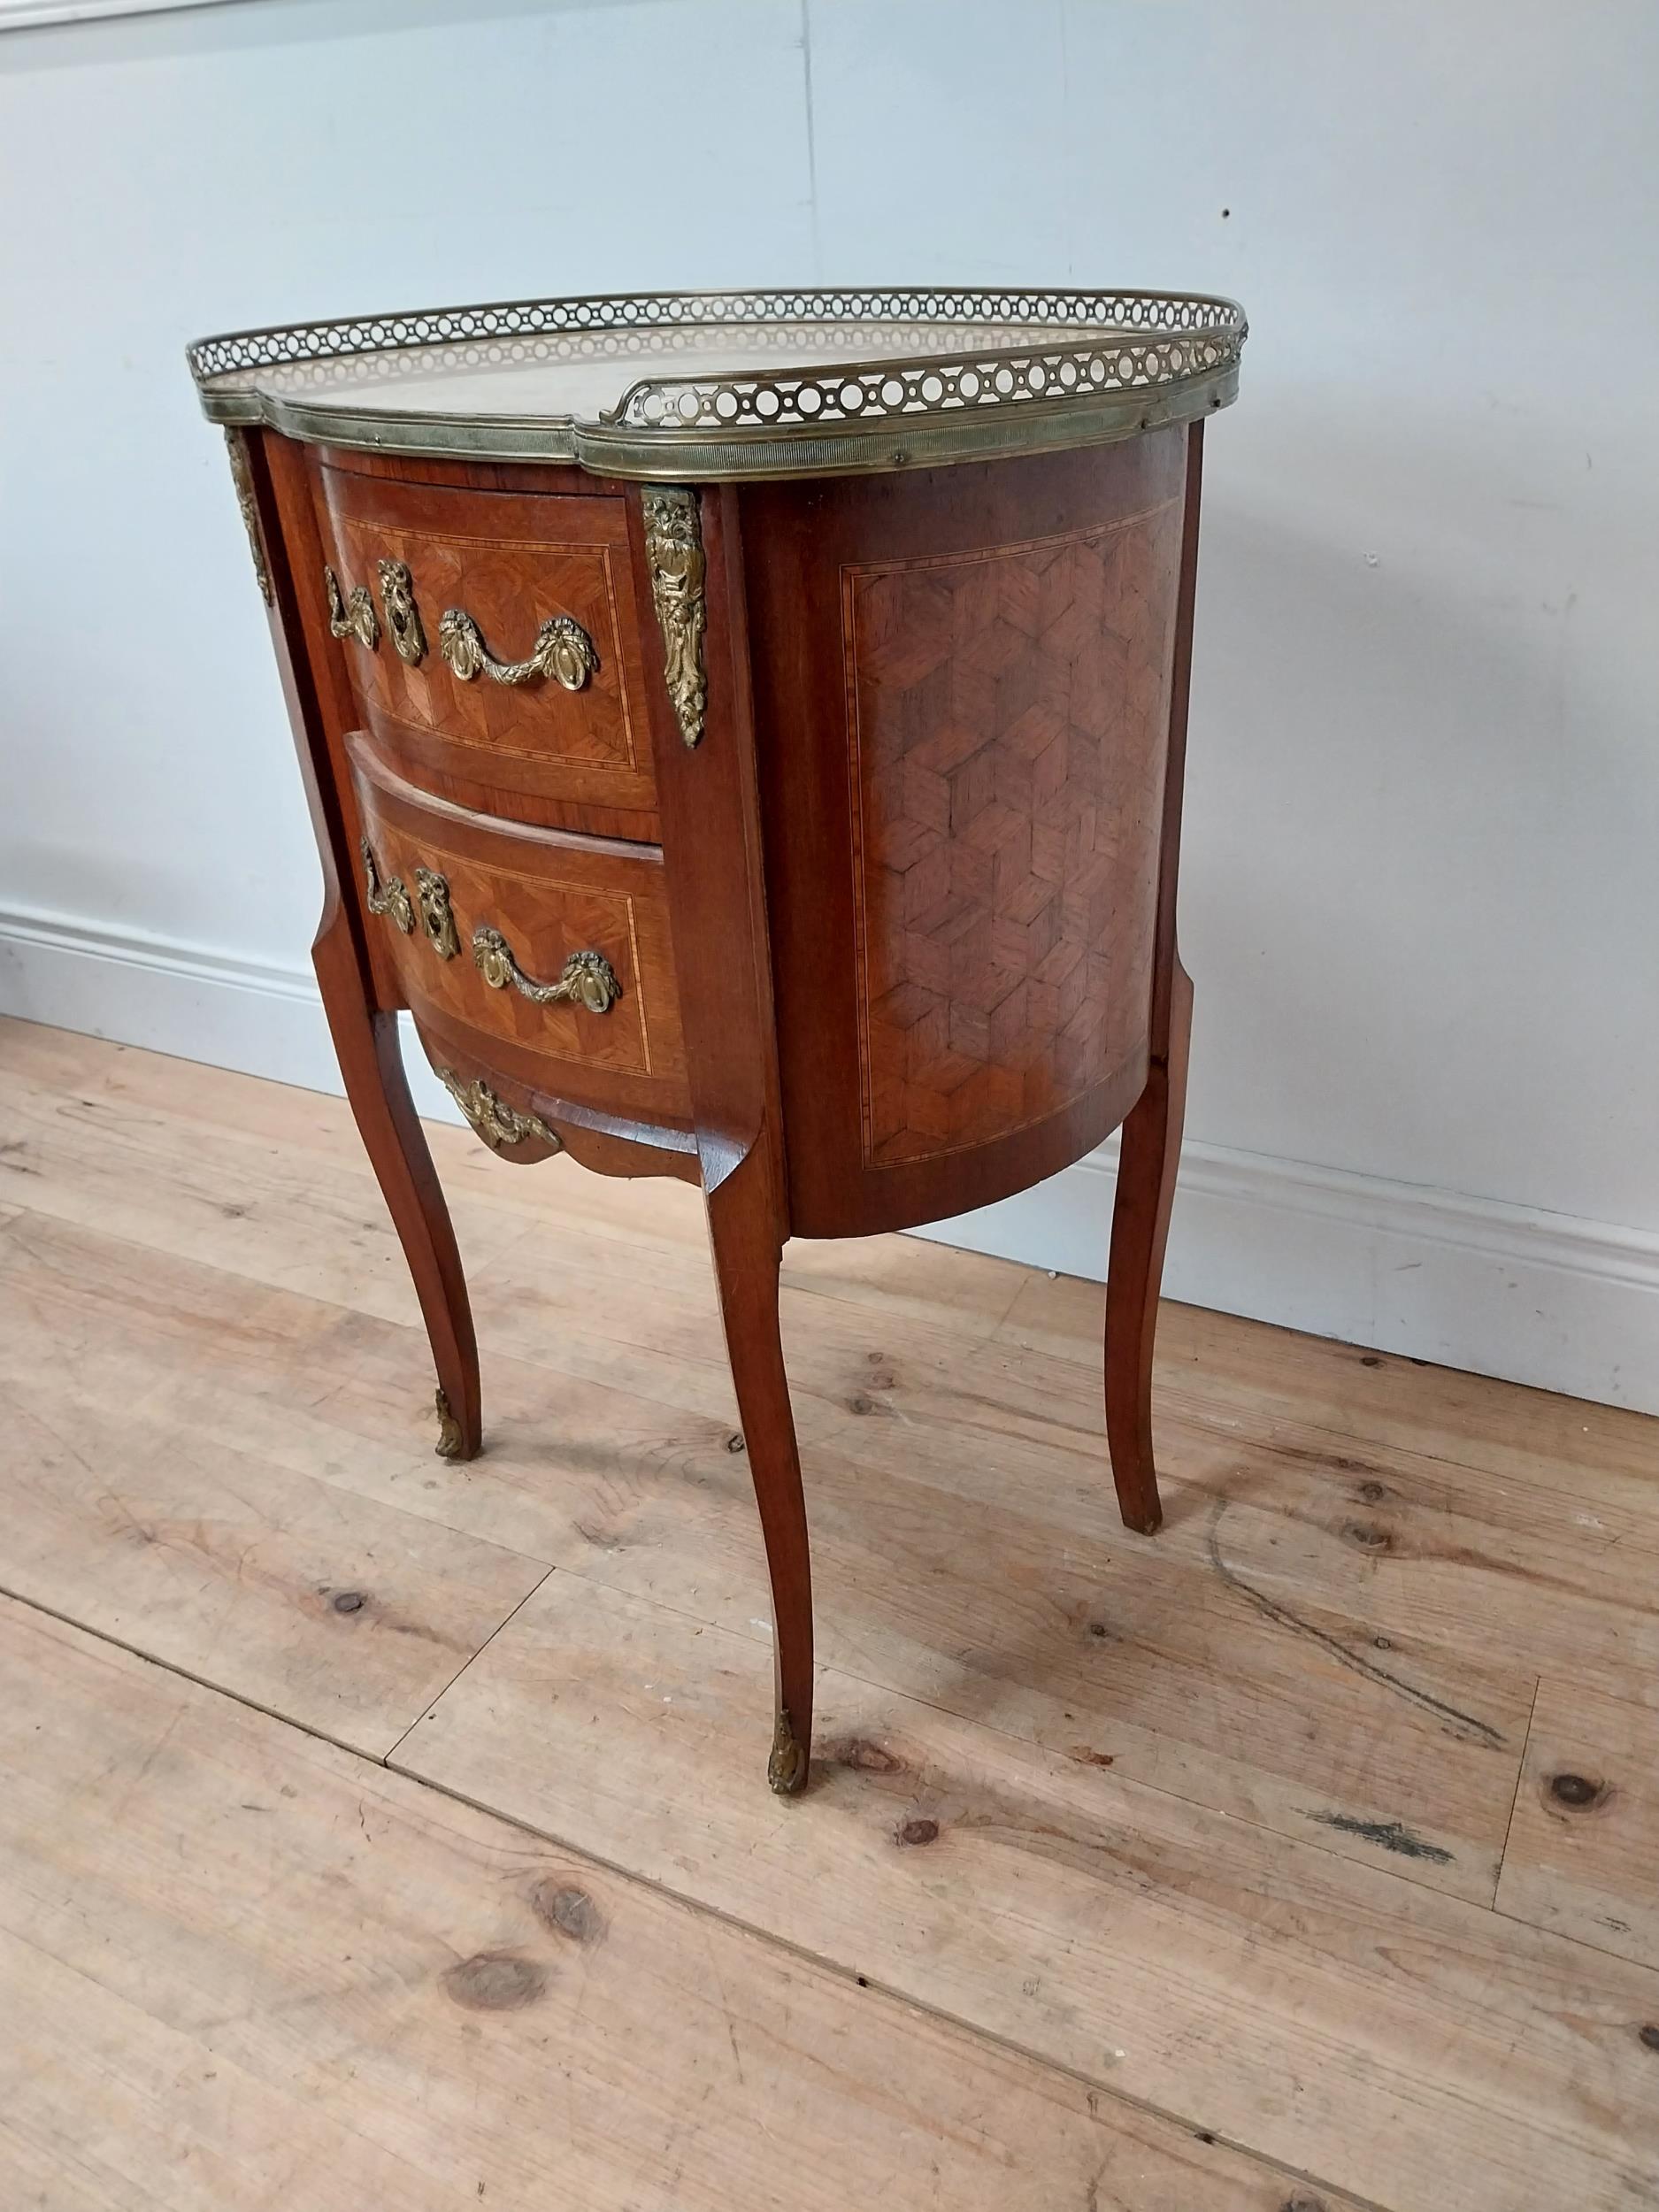 19th C. kidney shaped side cabinet with marble top, brass gallery and ormolou mounts with two - Image 3 of 5